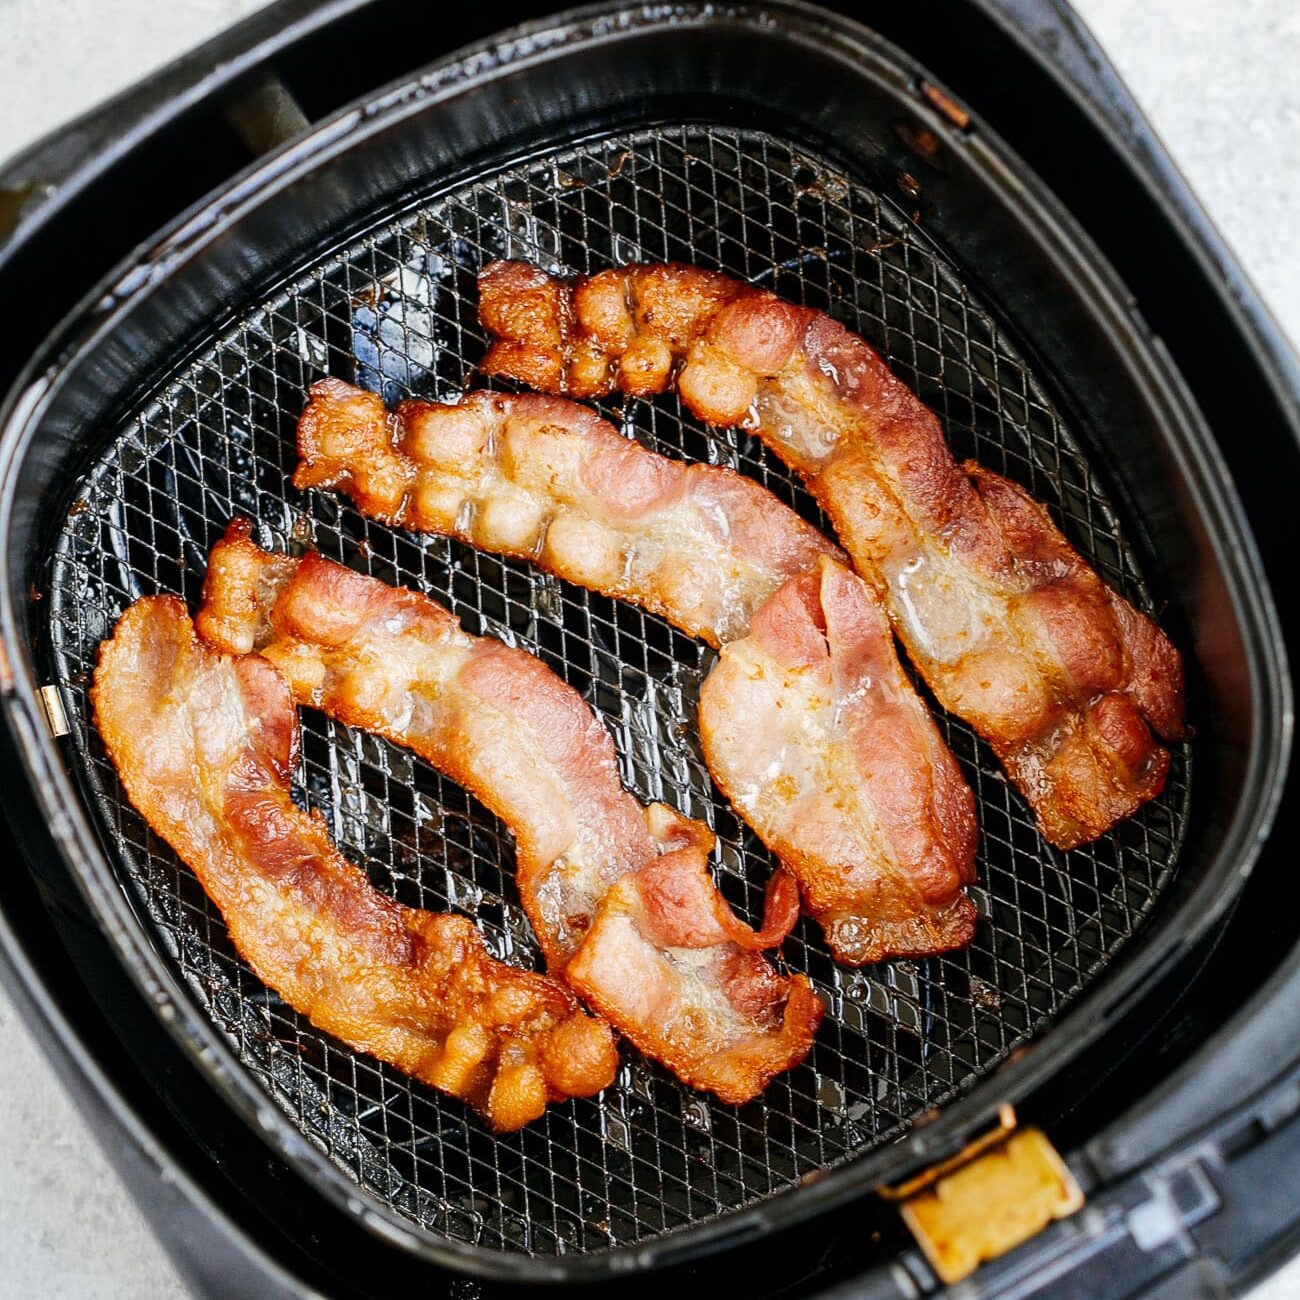 Overhead view of cooked bacon inside of an air fryer basket.